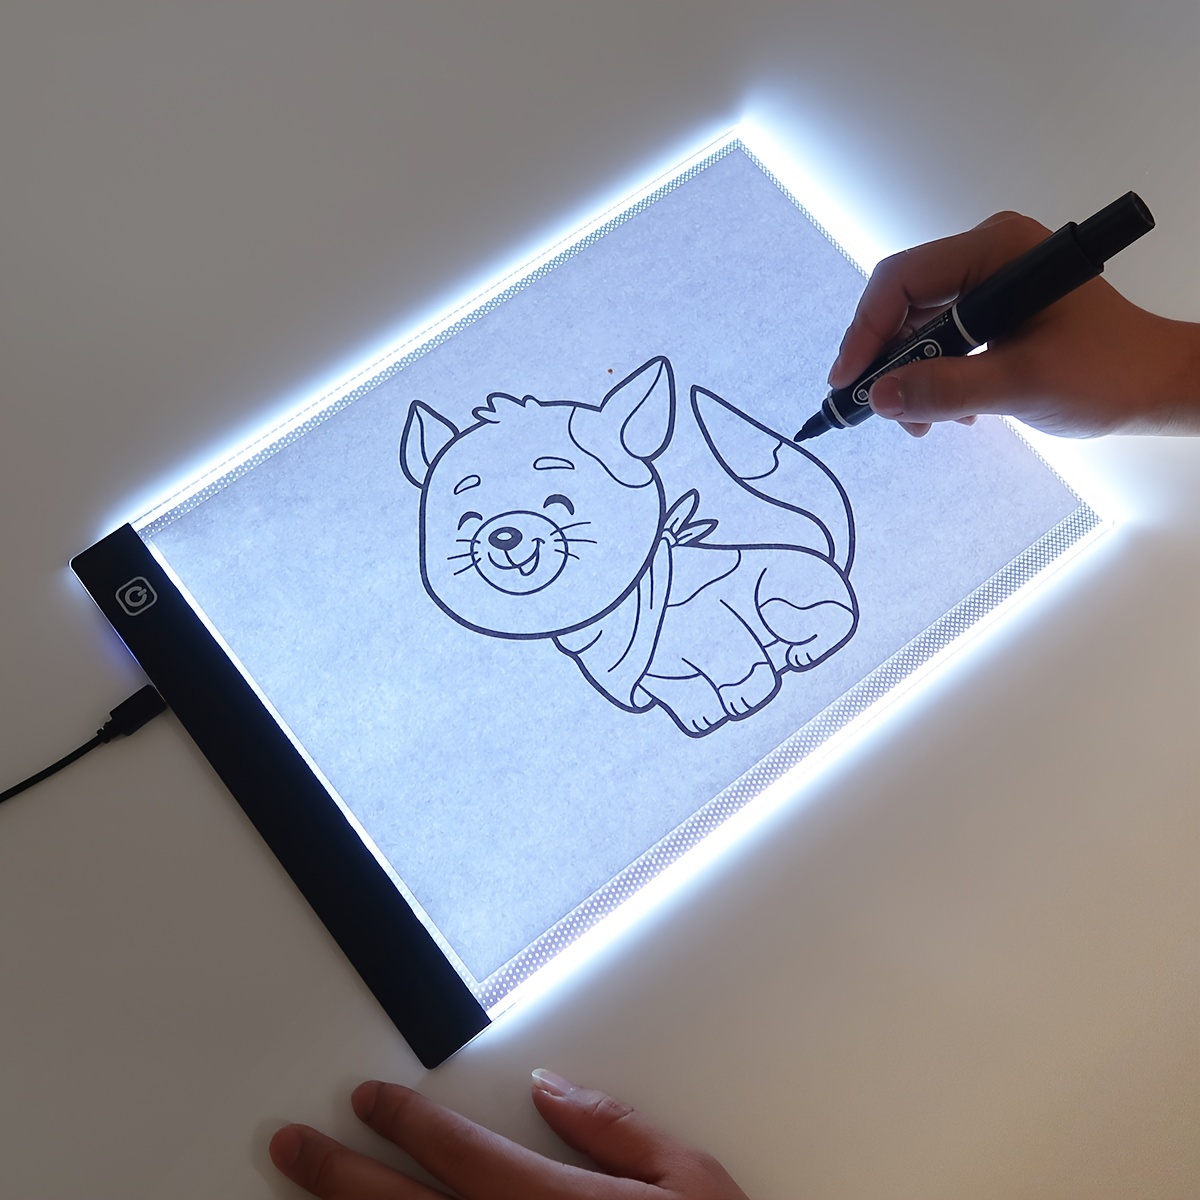 

A3 A4 A5 Led Light Pad, Ultra-thin Adjustable Usb Powered Tracing Box, 3-level Dimmable Light Board For Tattoo Drawing, Streaming Sketching, Animation Artwork - Acrylic (pmma) Material, Battery-free